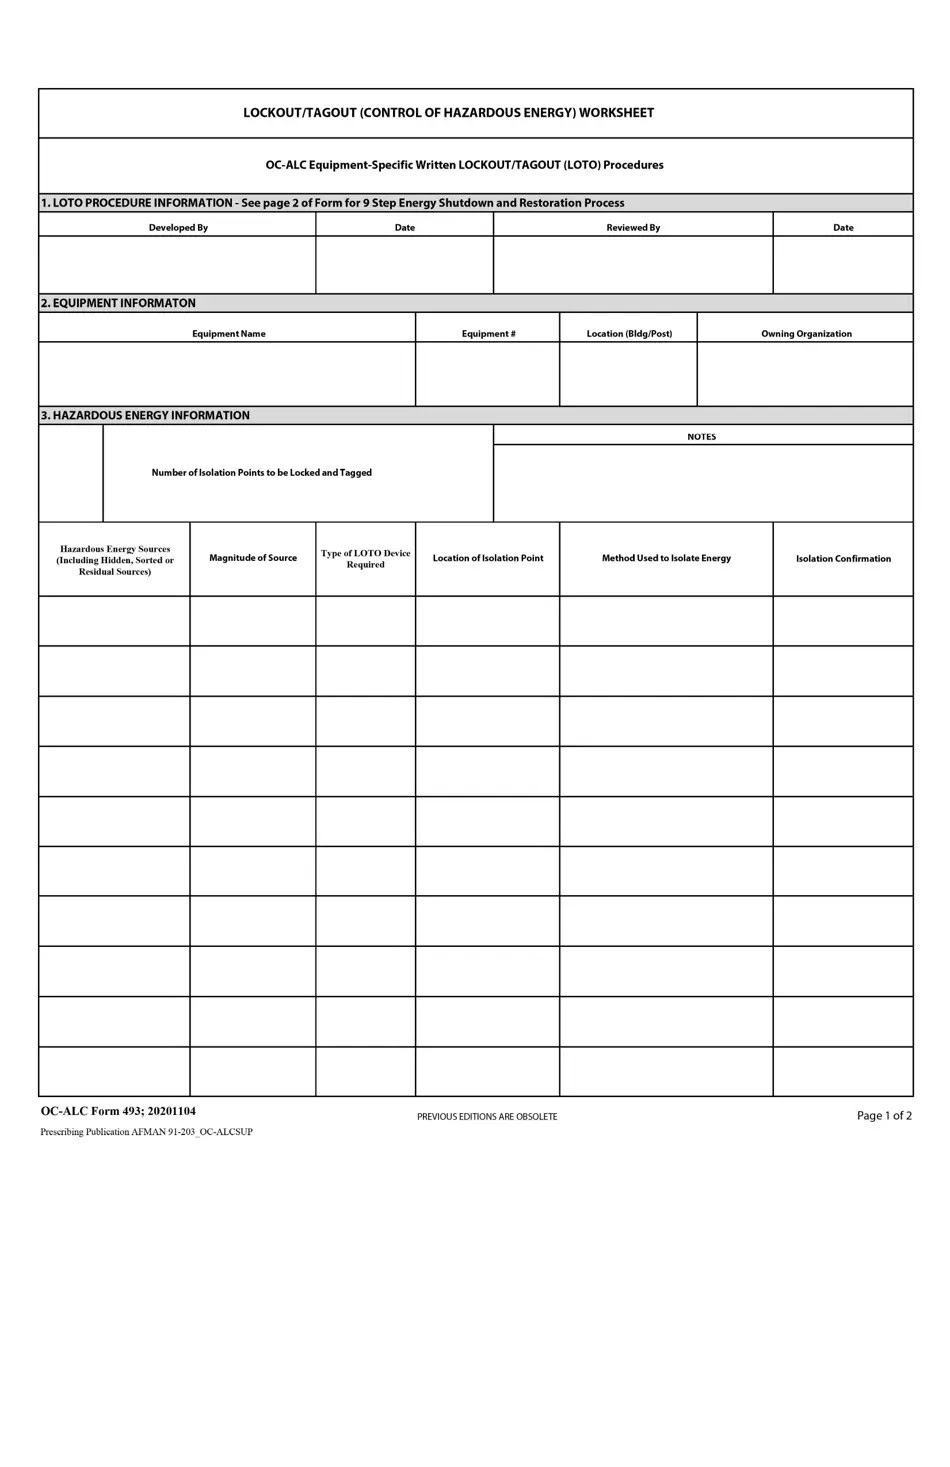 OCALC Form 493 Download Fillable PDF or Fill Online Lockout/Tagout